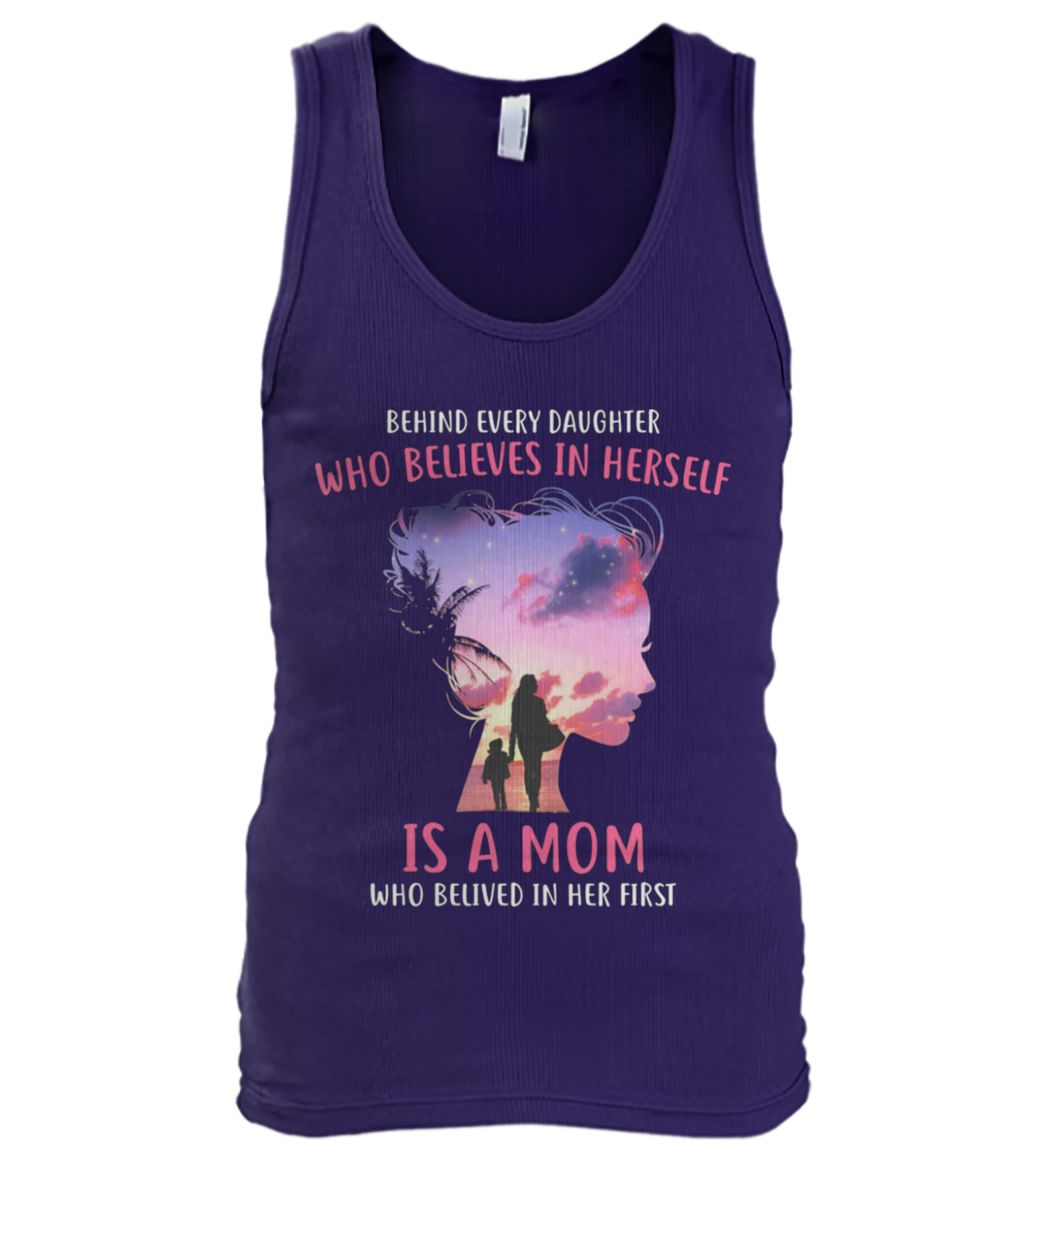 Behind every daughter who believes in herself is a mom who believed in her first men's tank top